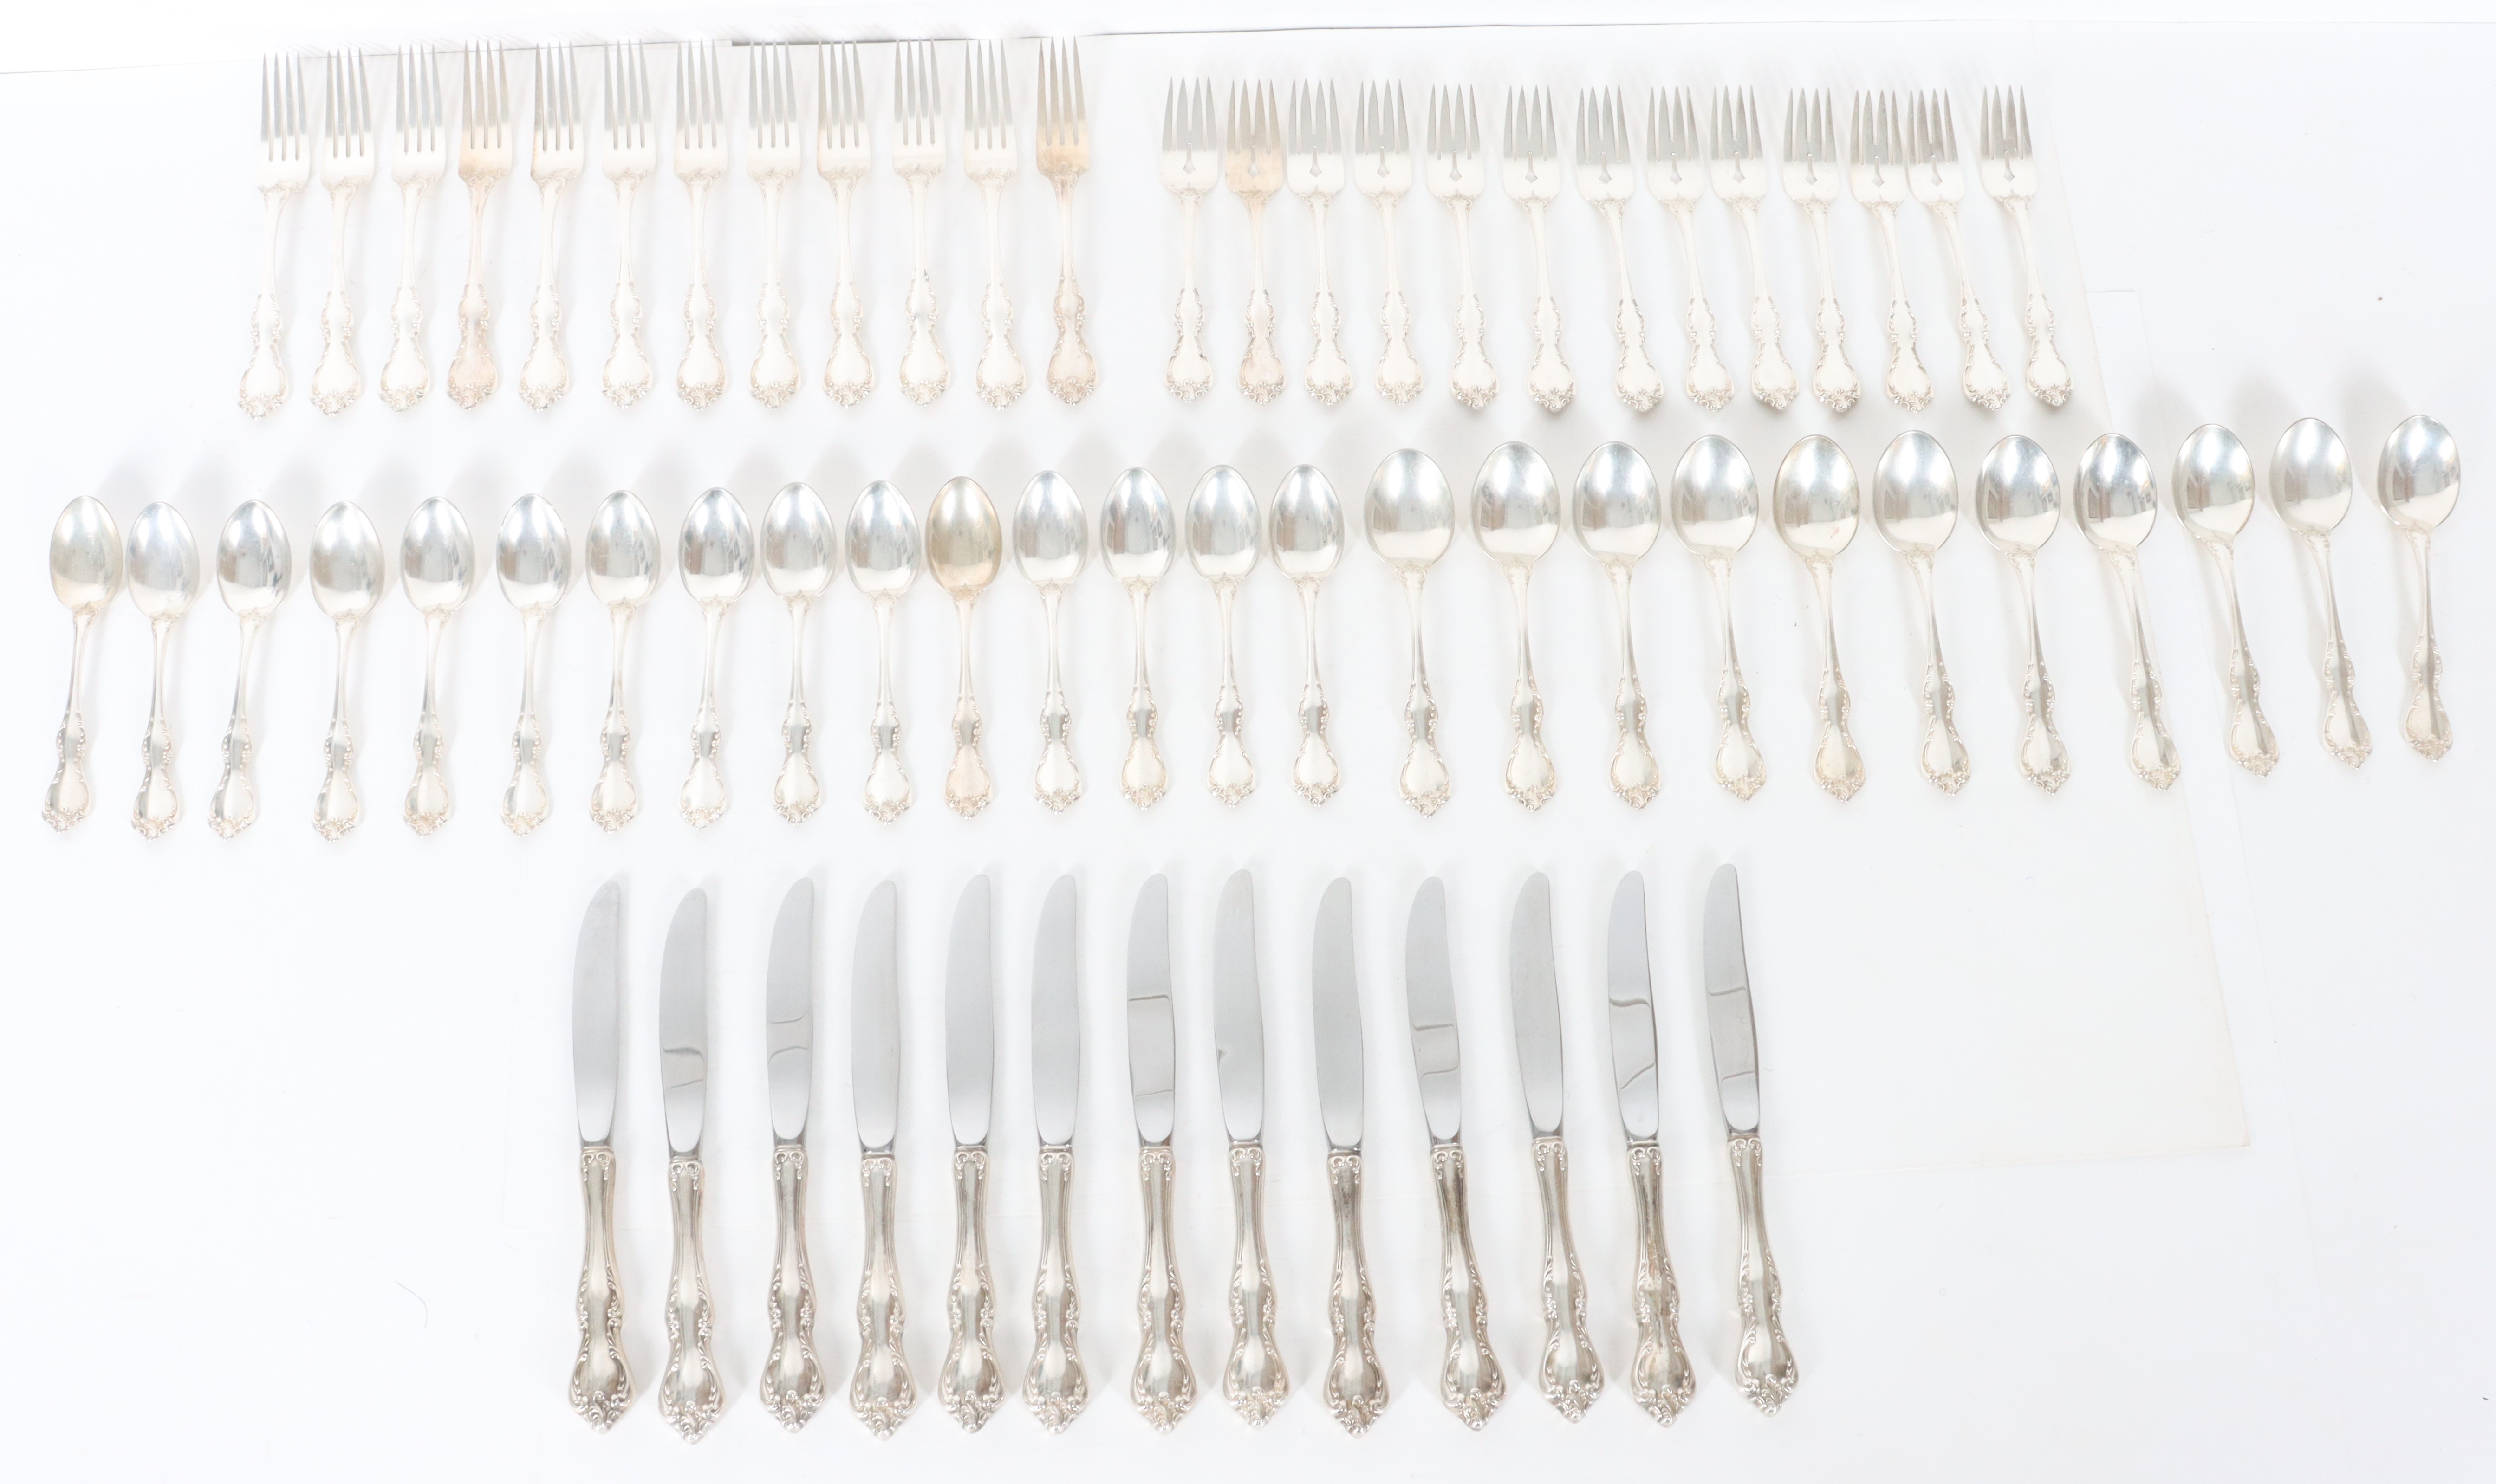 (51) Pc 1959 Towle Sterling Silverware Set, 81 OZT